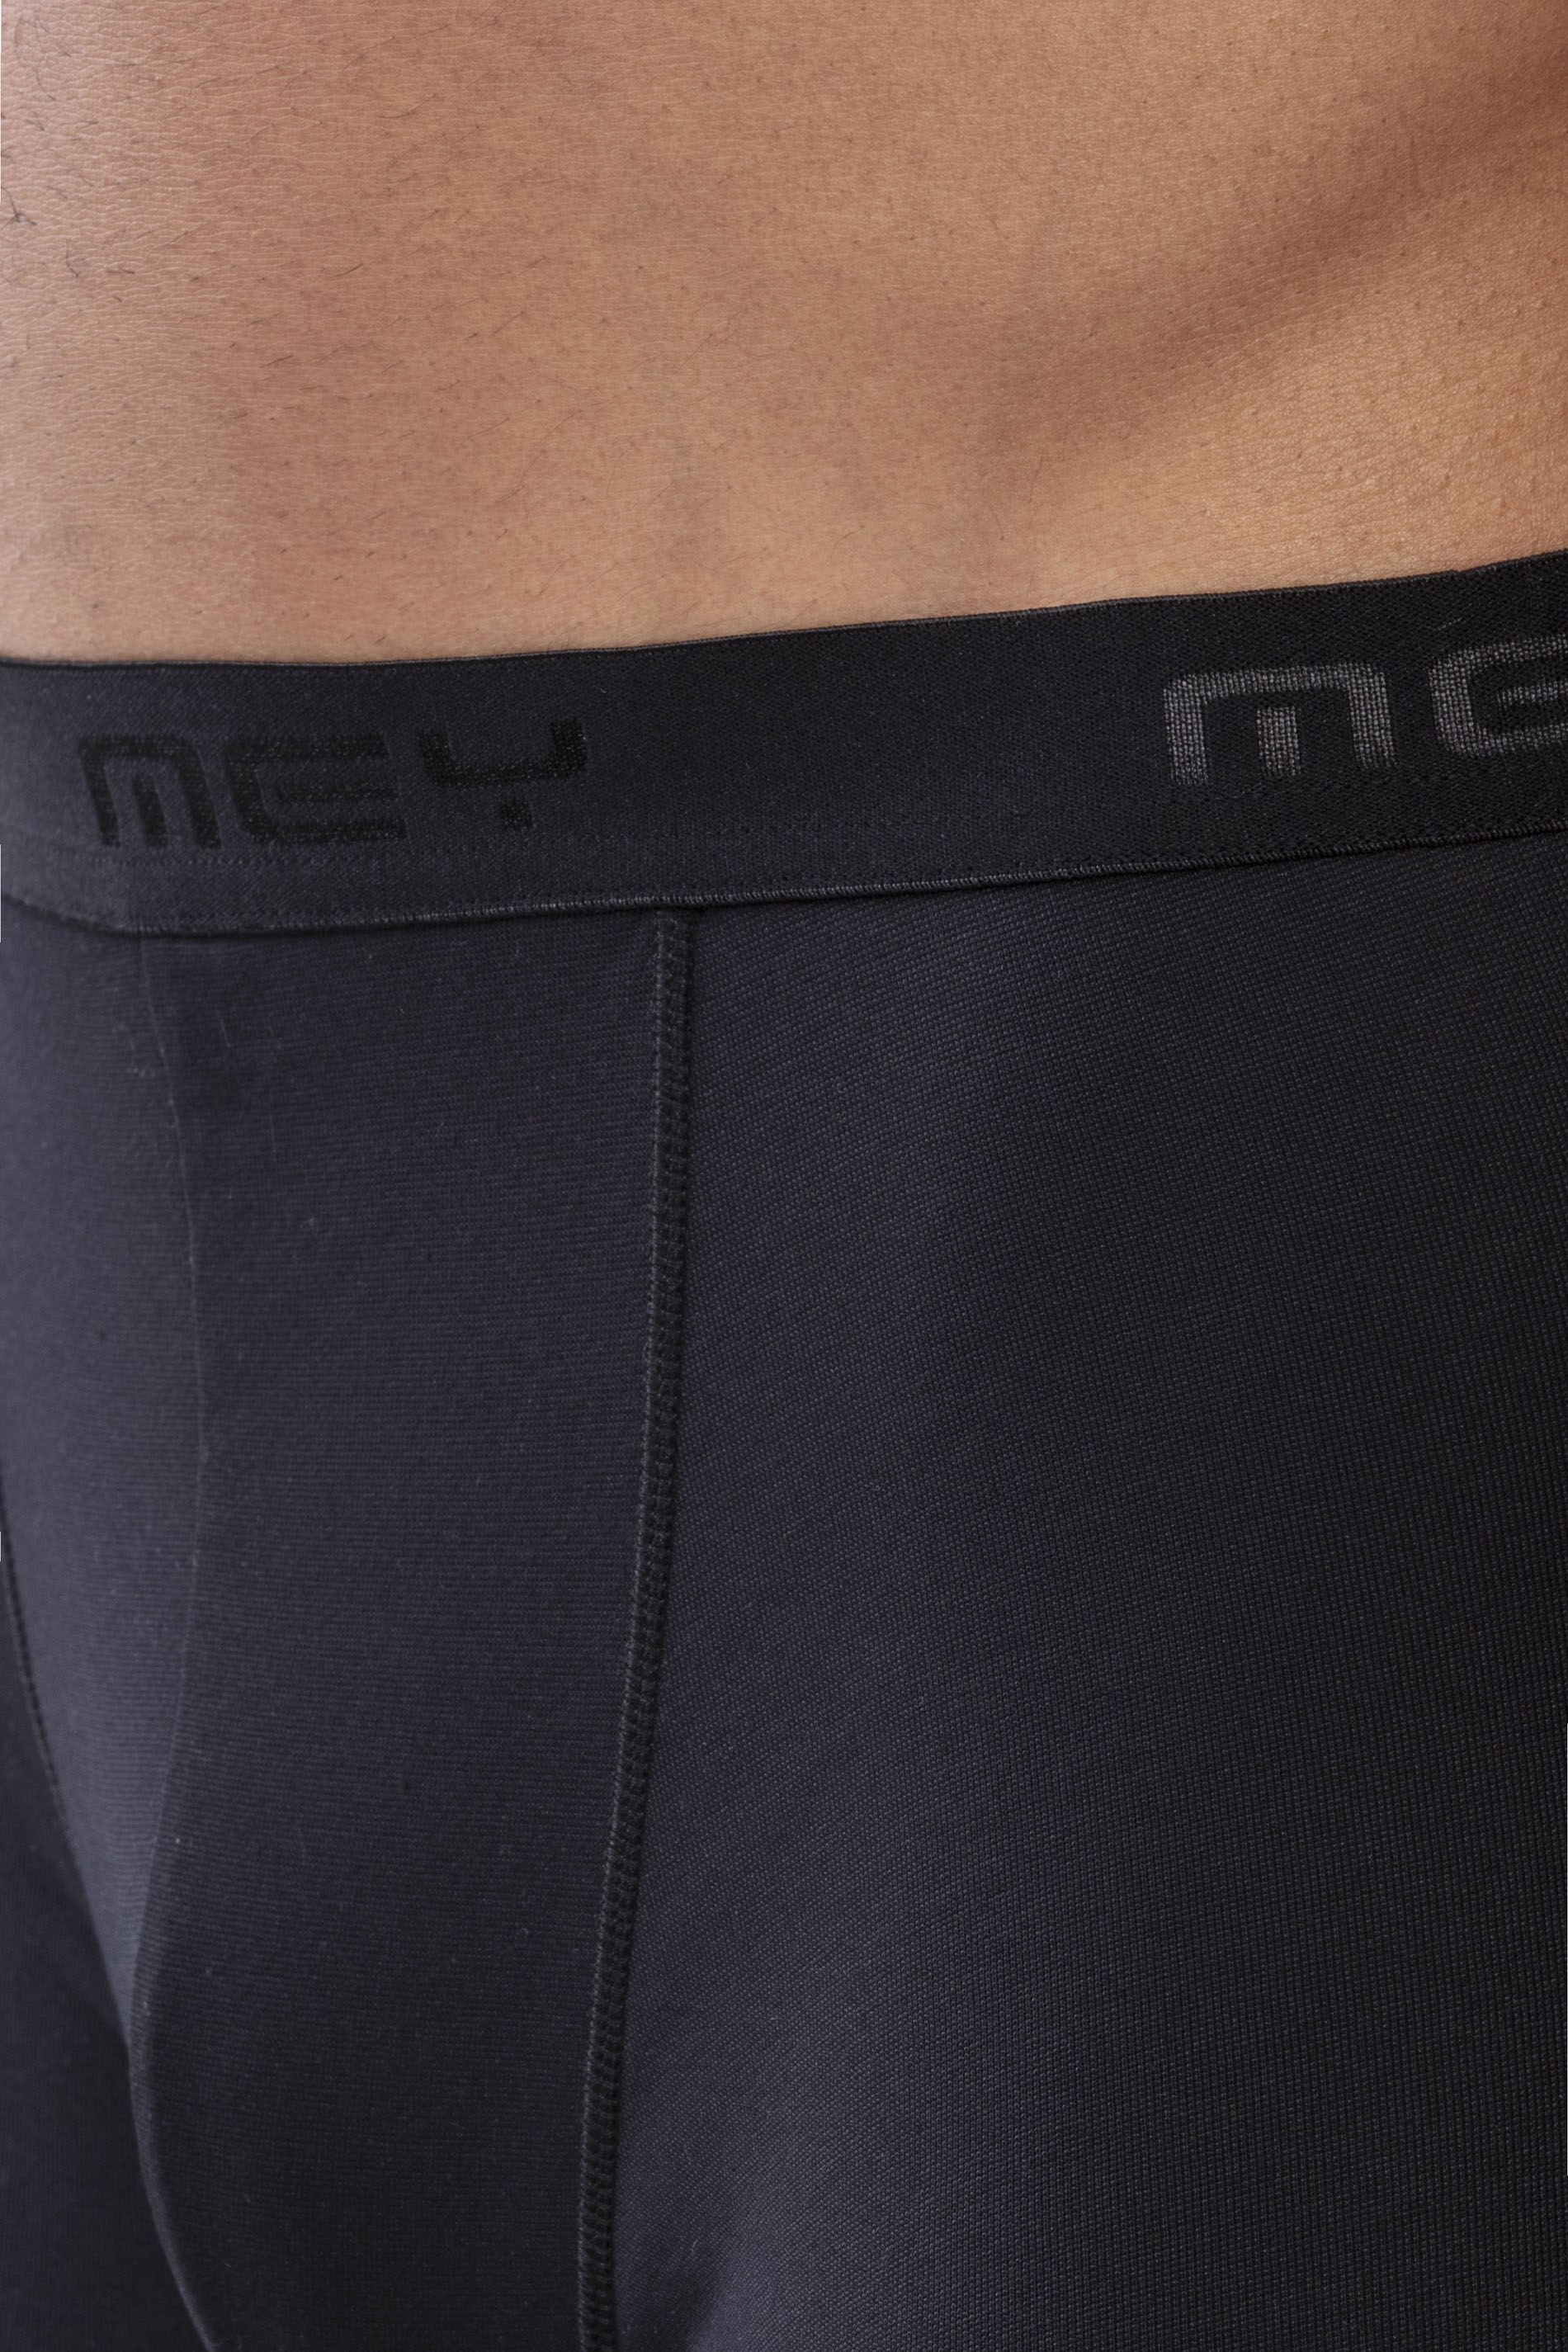 Boxers Black Serie Software Detail View 01 | mey®